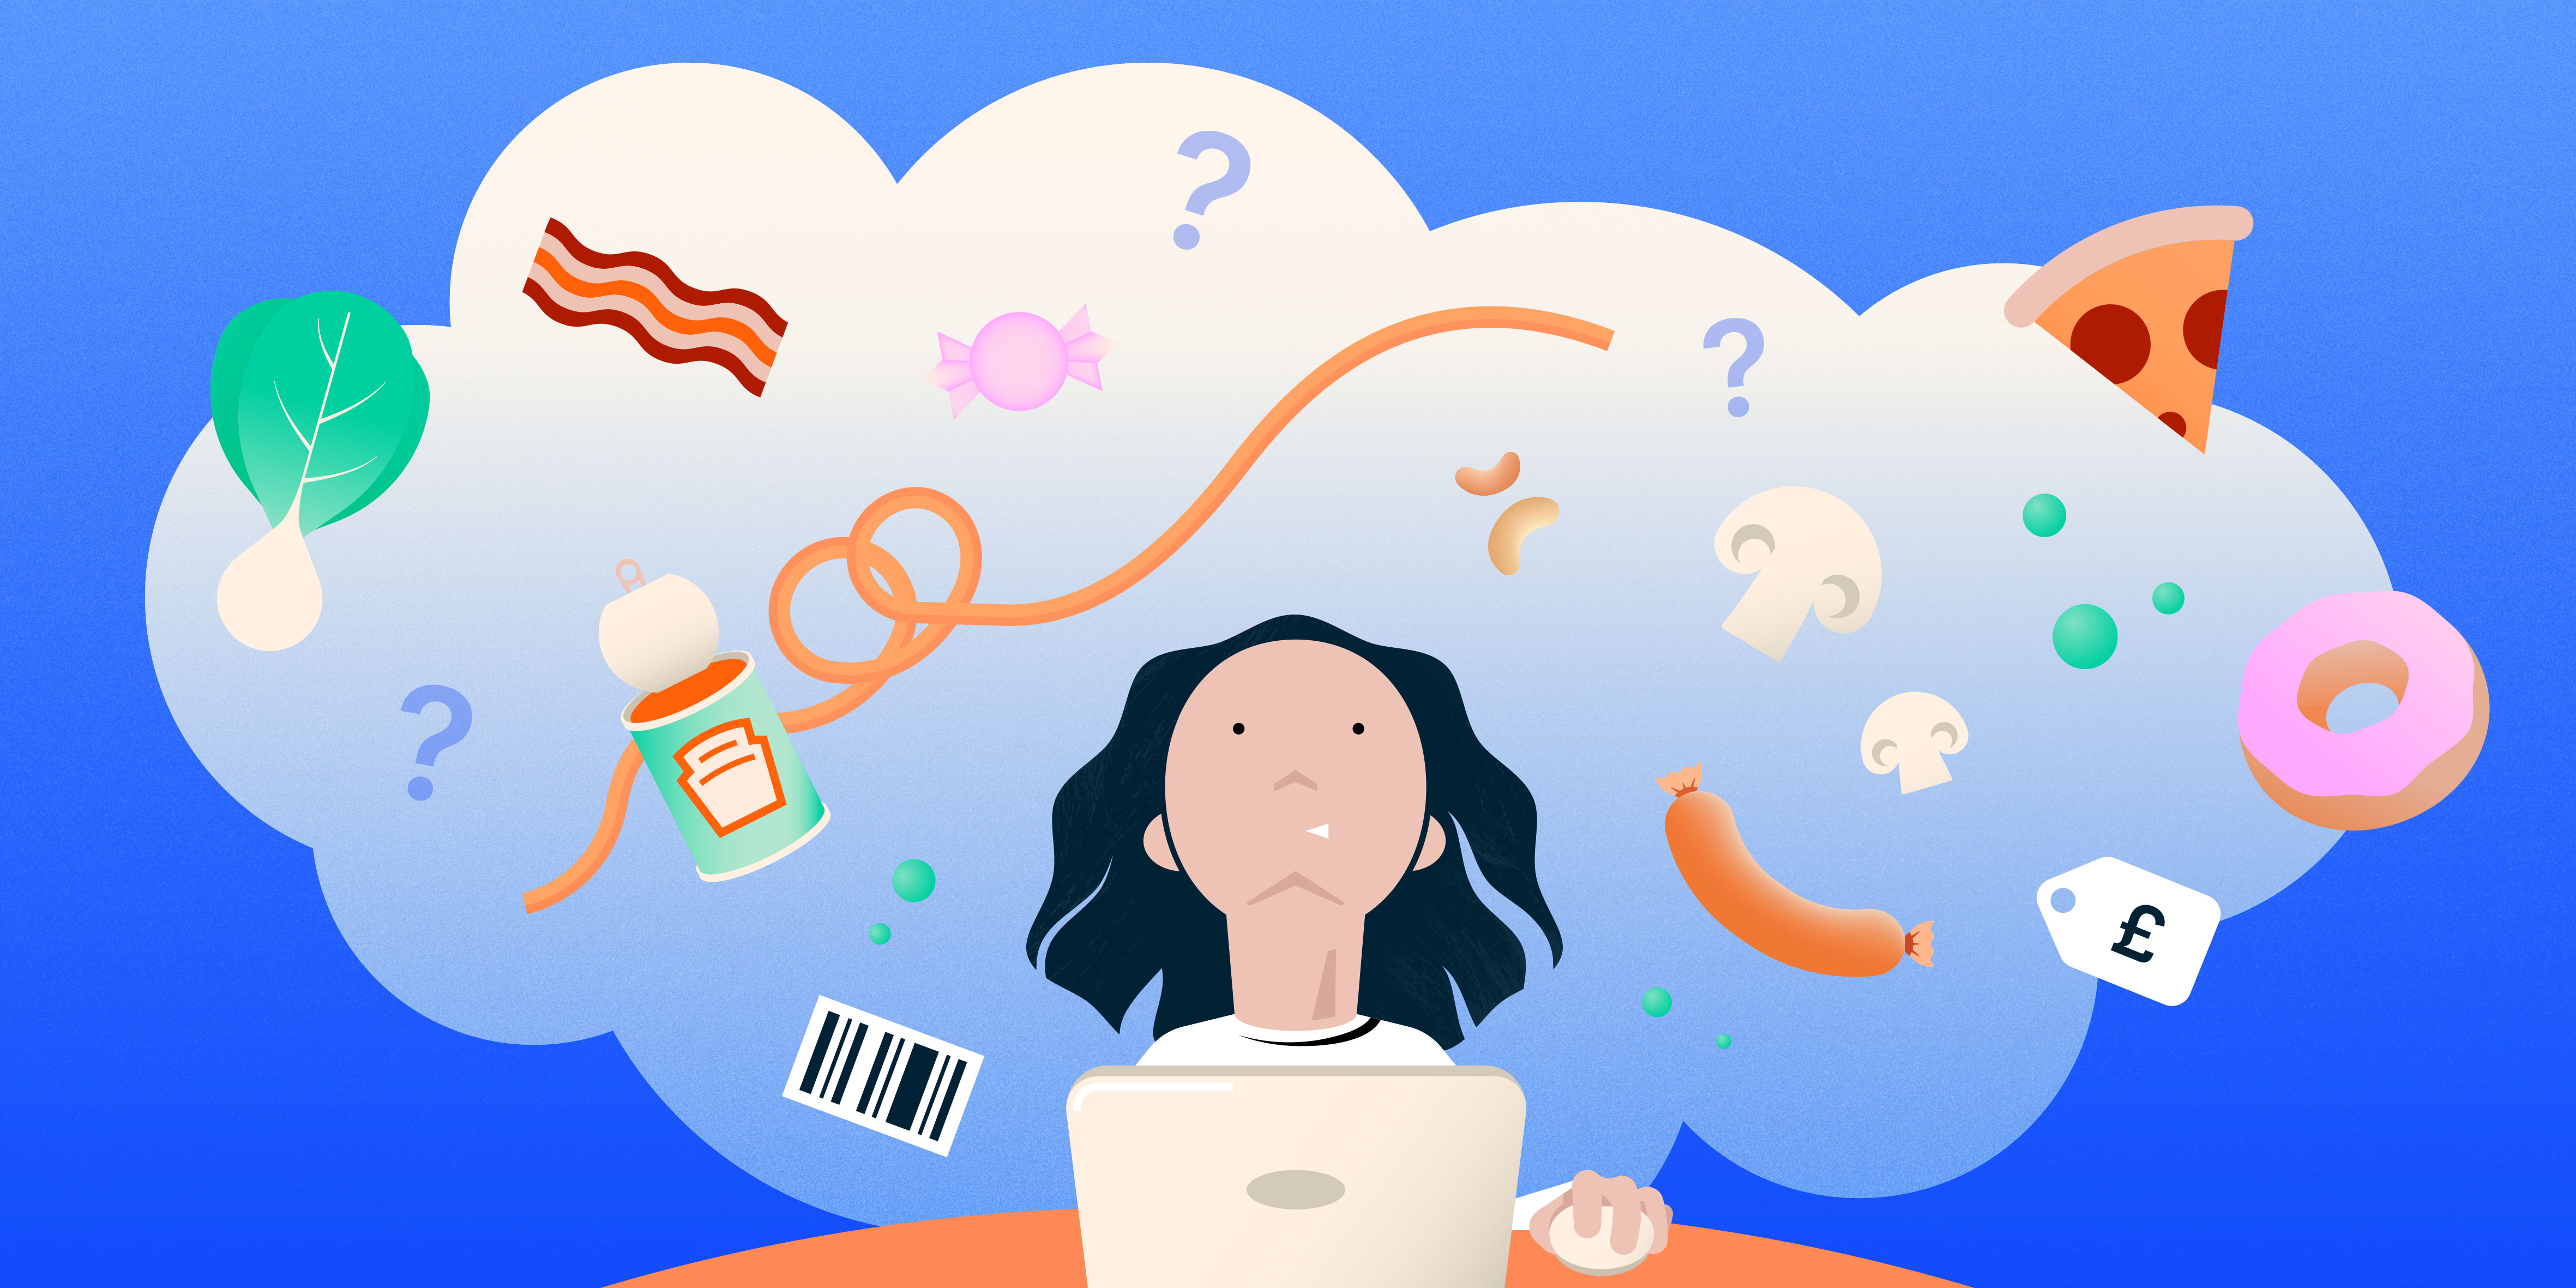 A digital illustration of someone on a laptop looking up into a cloud above their head, containing food symbols like pizza, a donut, barcodes, sausages and beans.